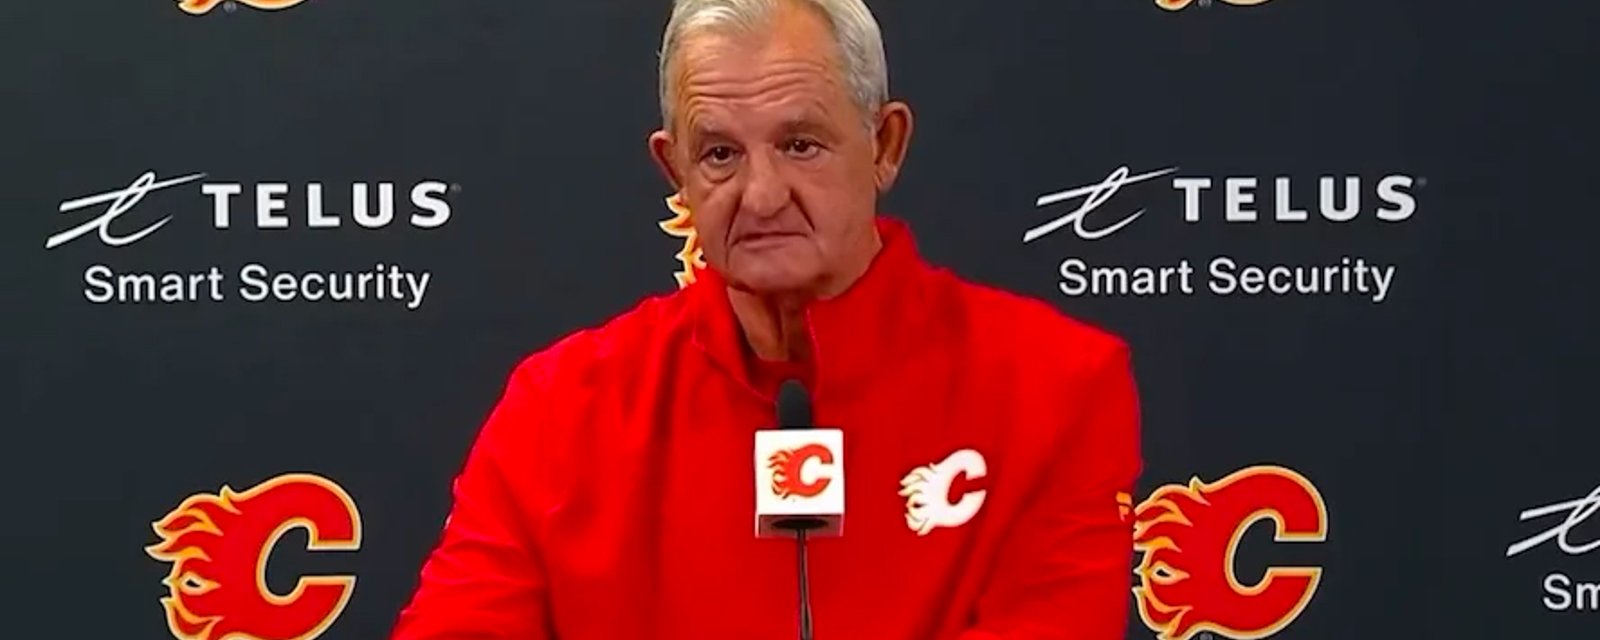 Uglier details revealed about Darryl Sutter’s toxic relationship with his own players!